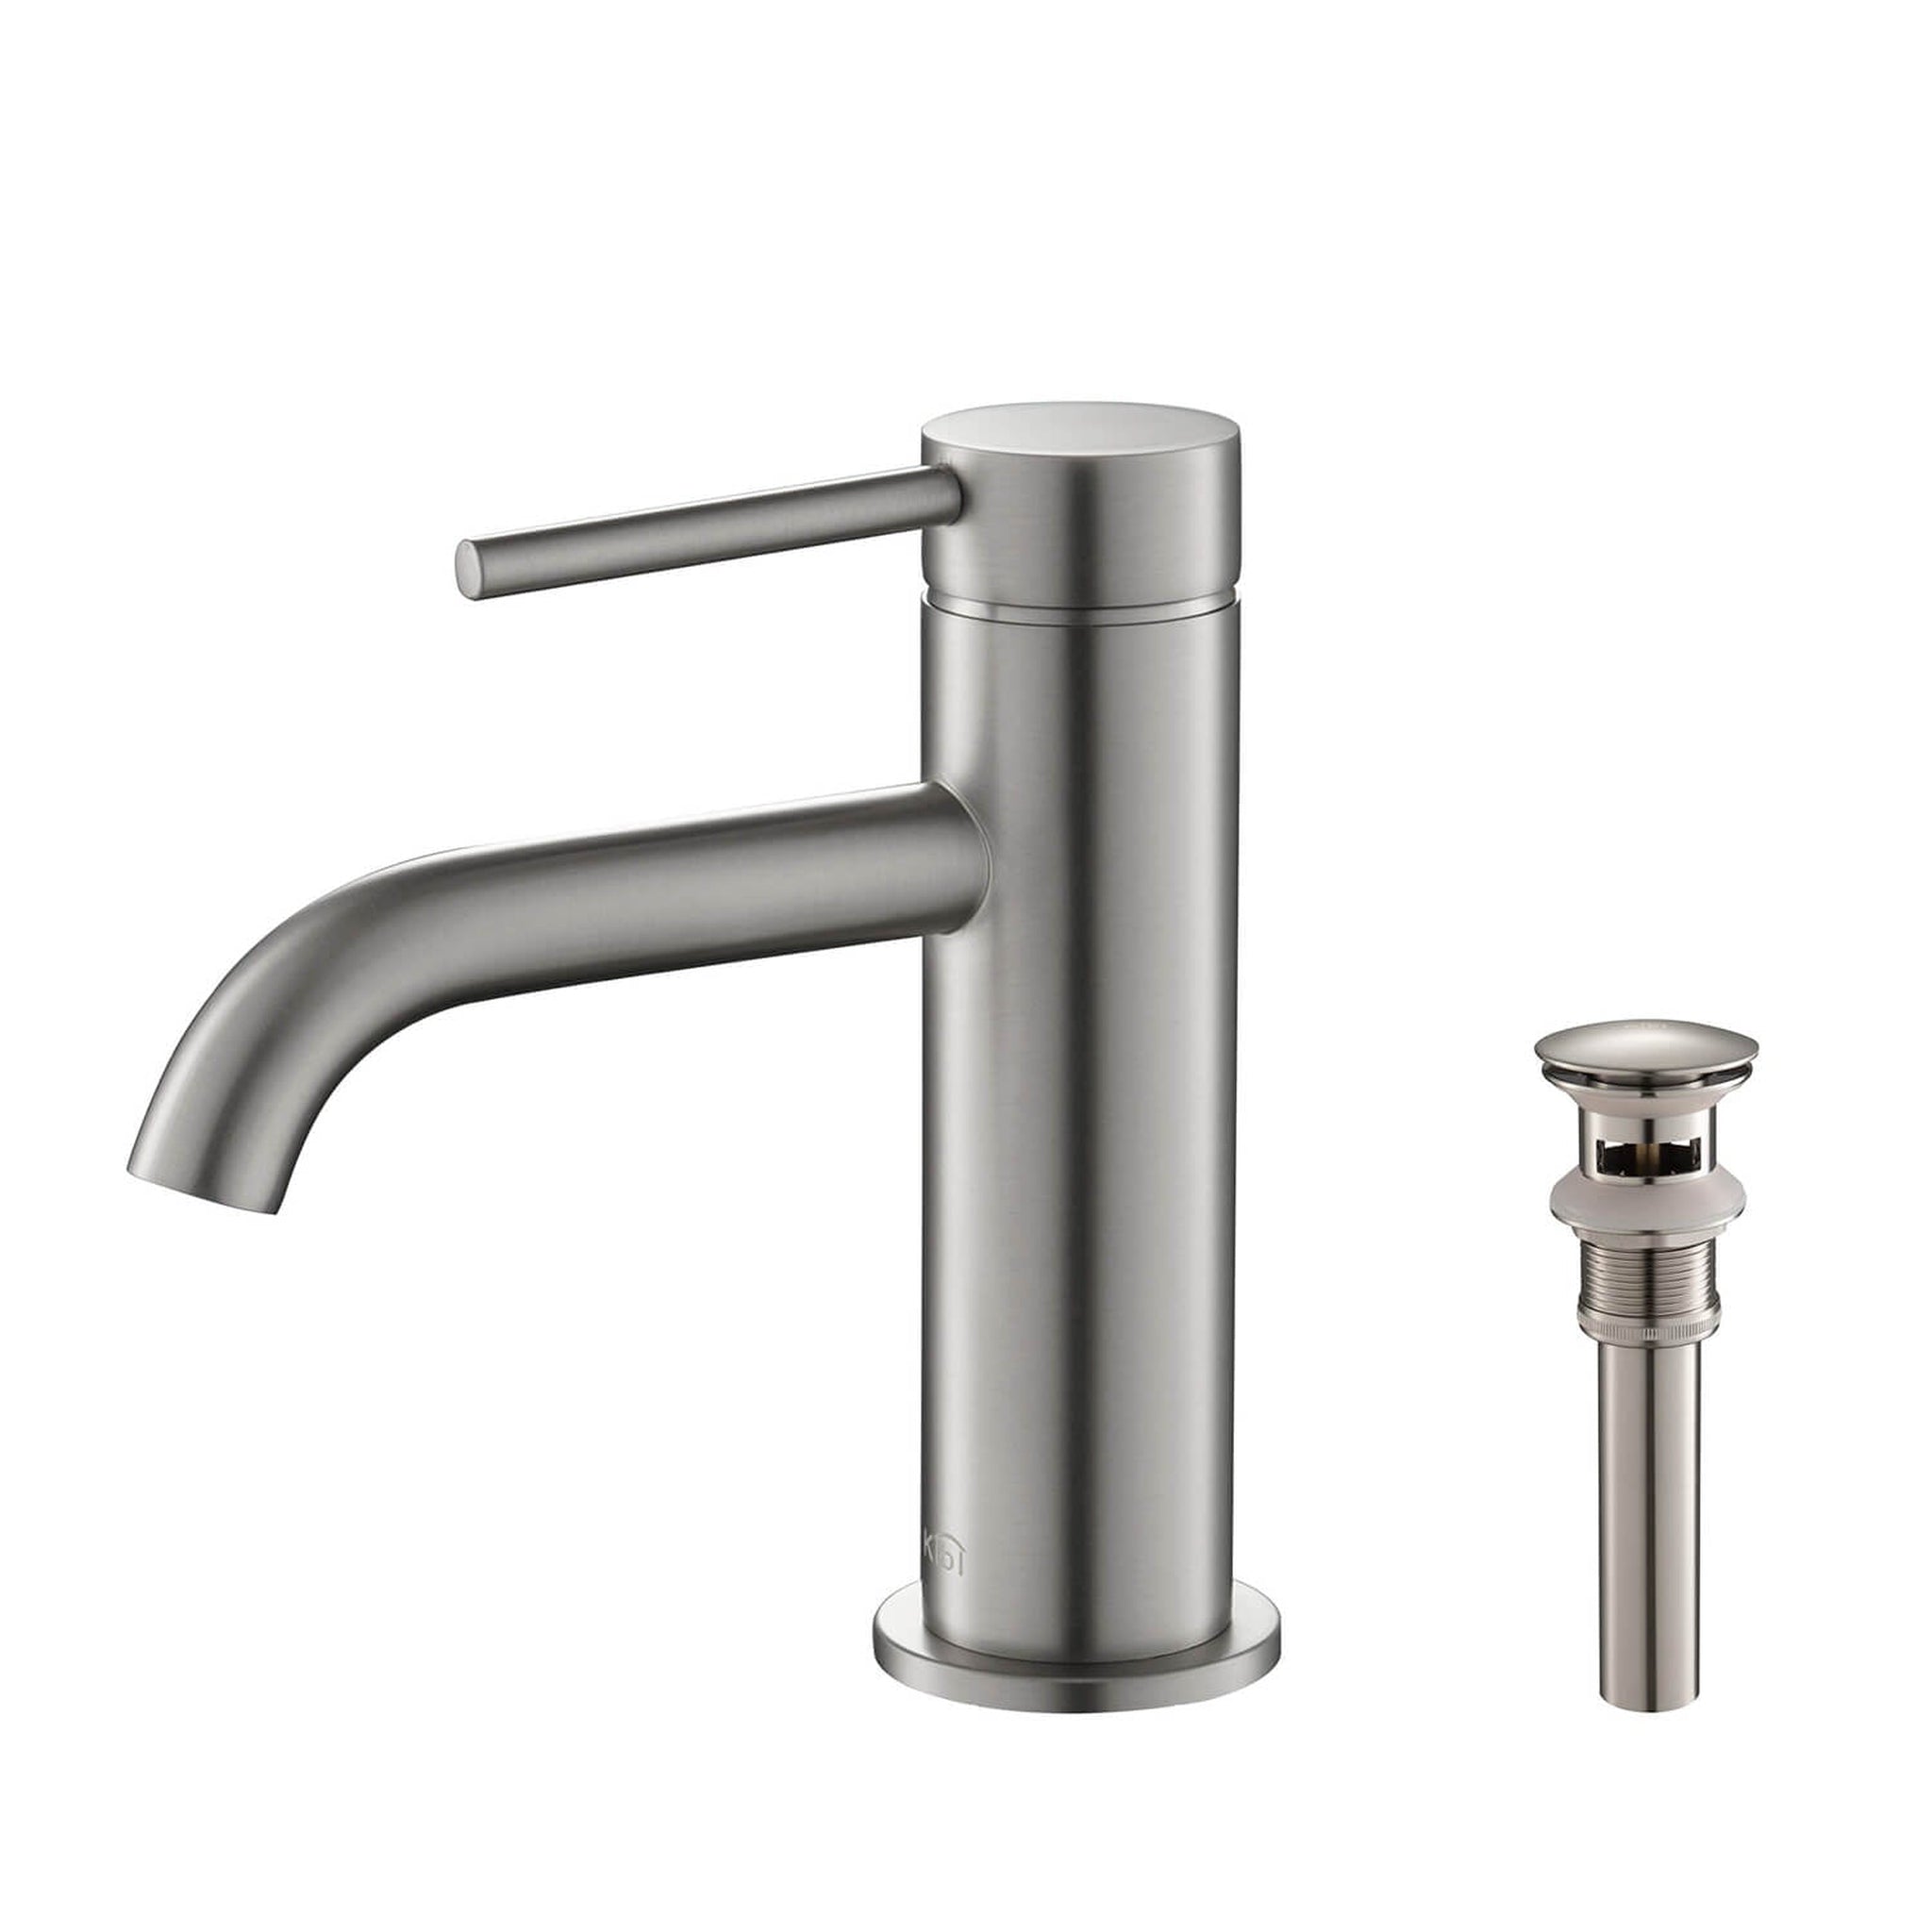 KIBI, KIBI Circular Single Handle Brushed Nickel Solid Brass Bathroom Sink Faucet With Pop-Up Drain Stopper Small Cover With Overflow